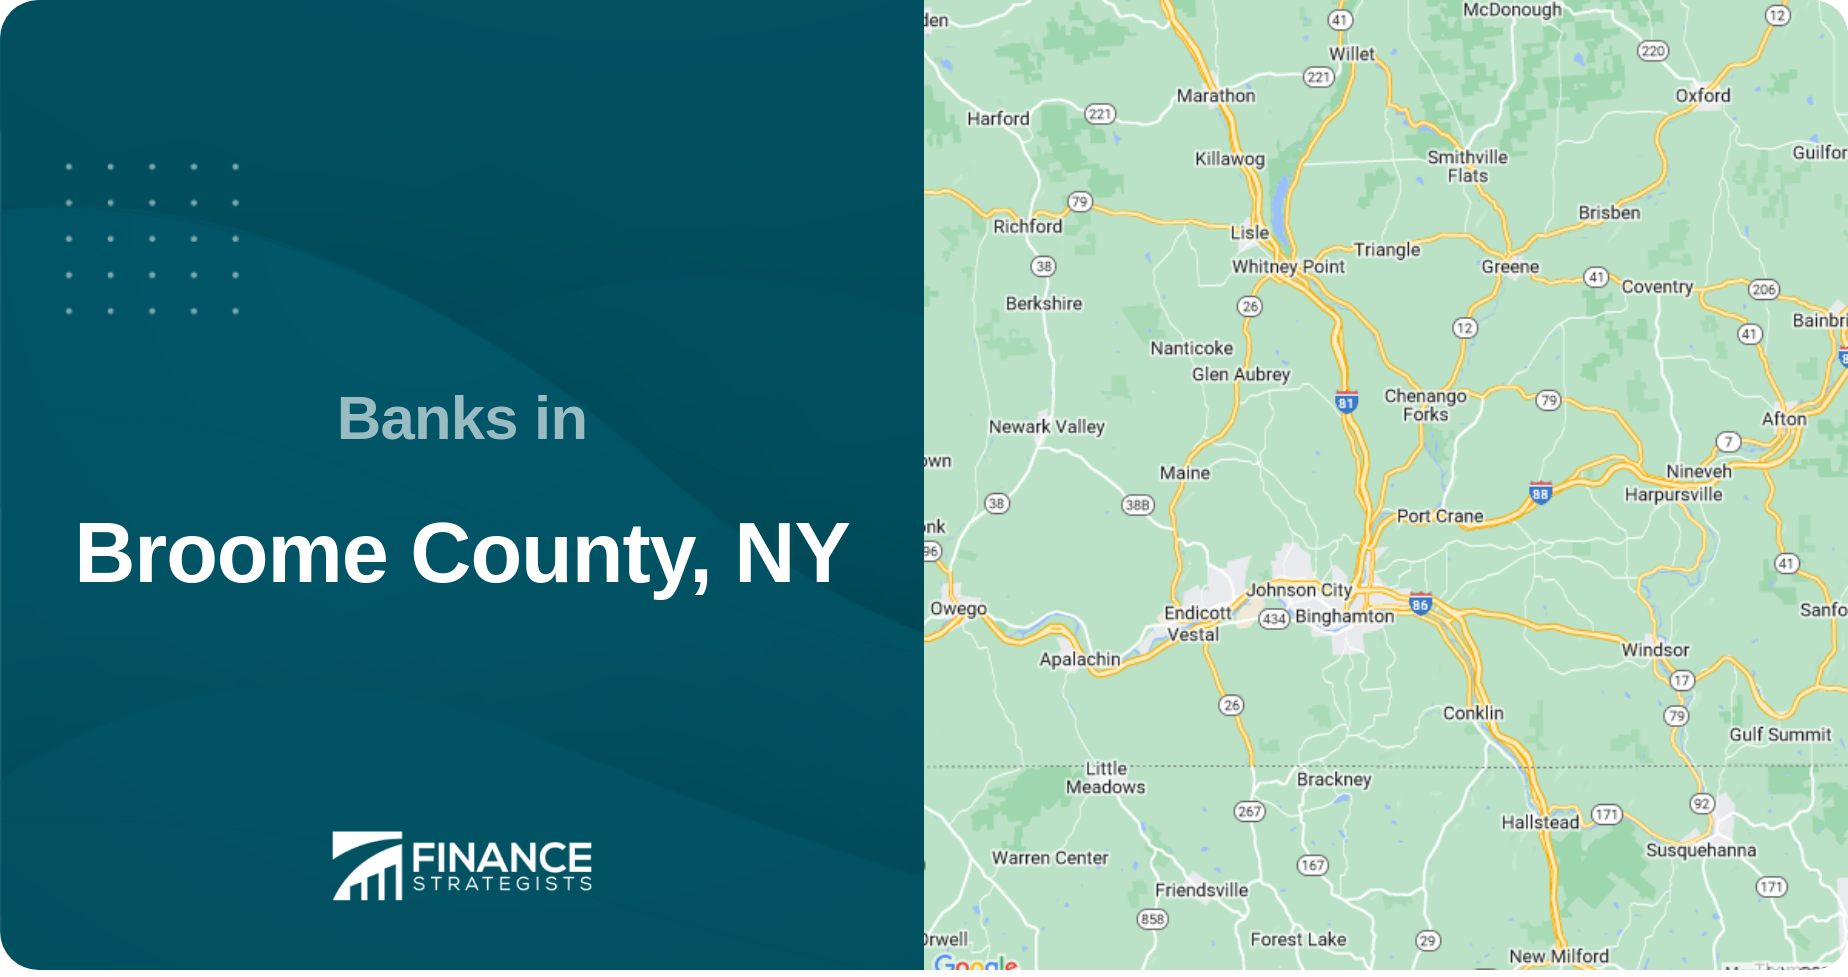 Banks in Broome County, NY